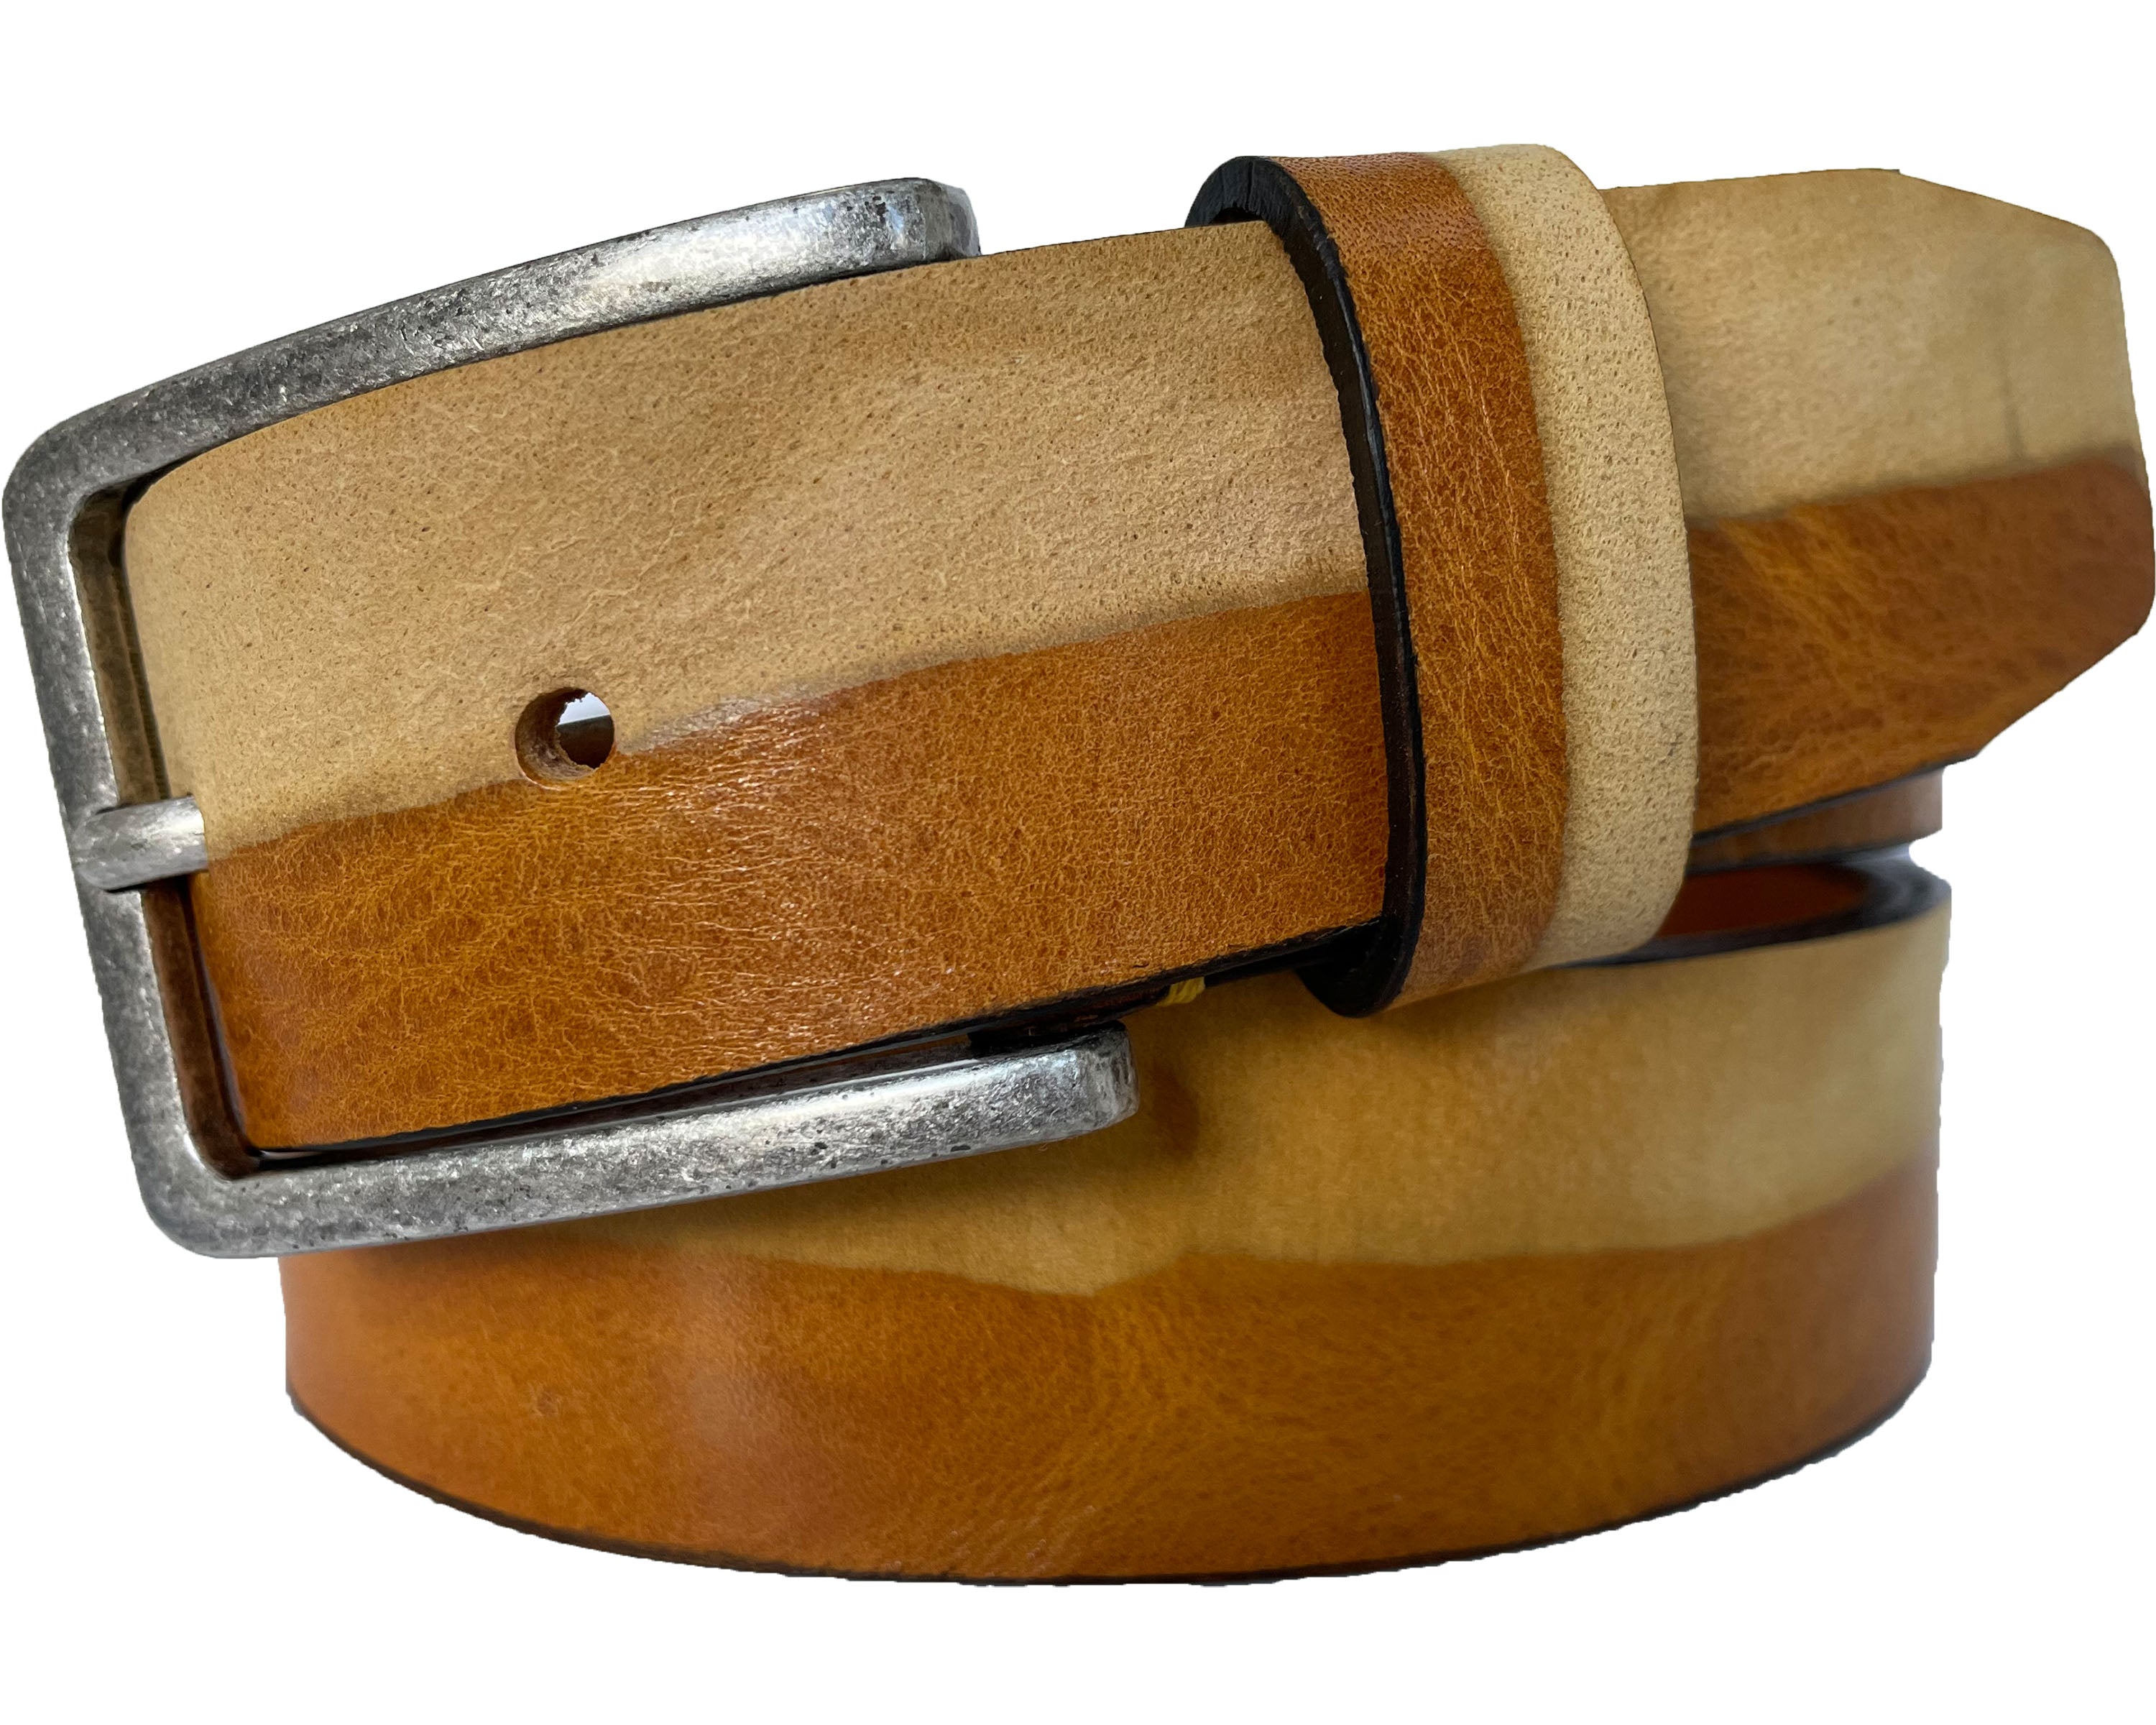 TWO TONE STONE WASHED HONEY TAN 35MM DISTRESSED HIDE LEATHER BELT